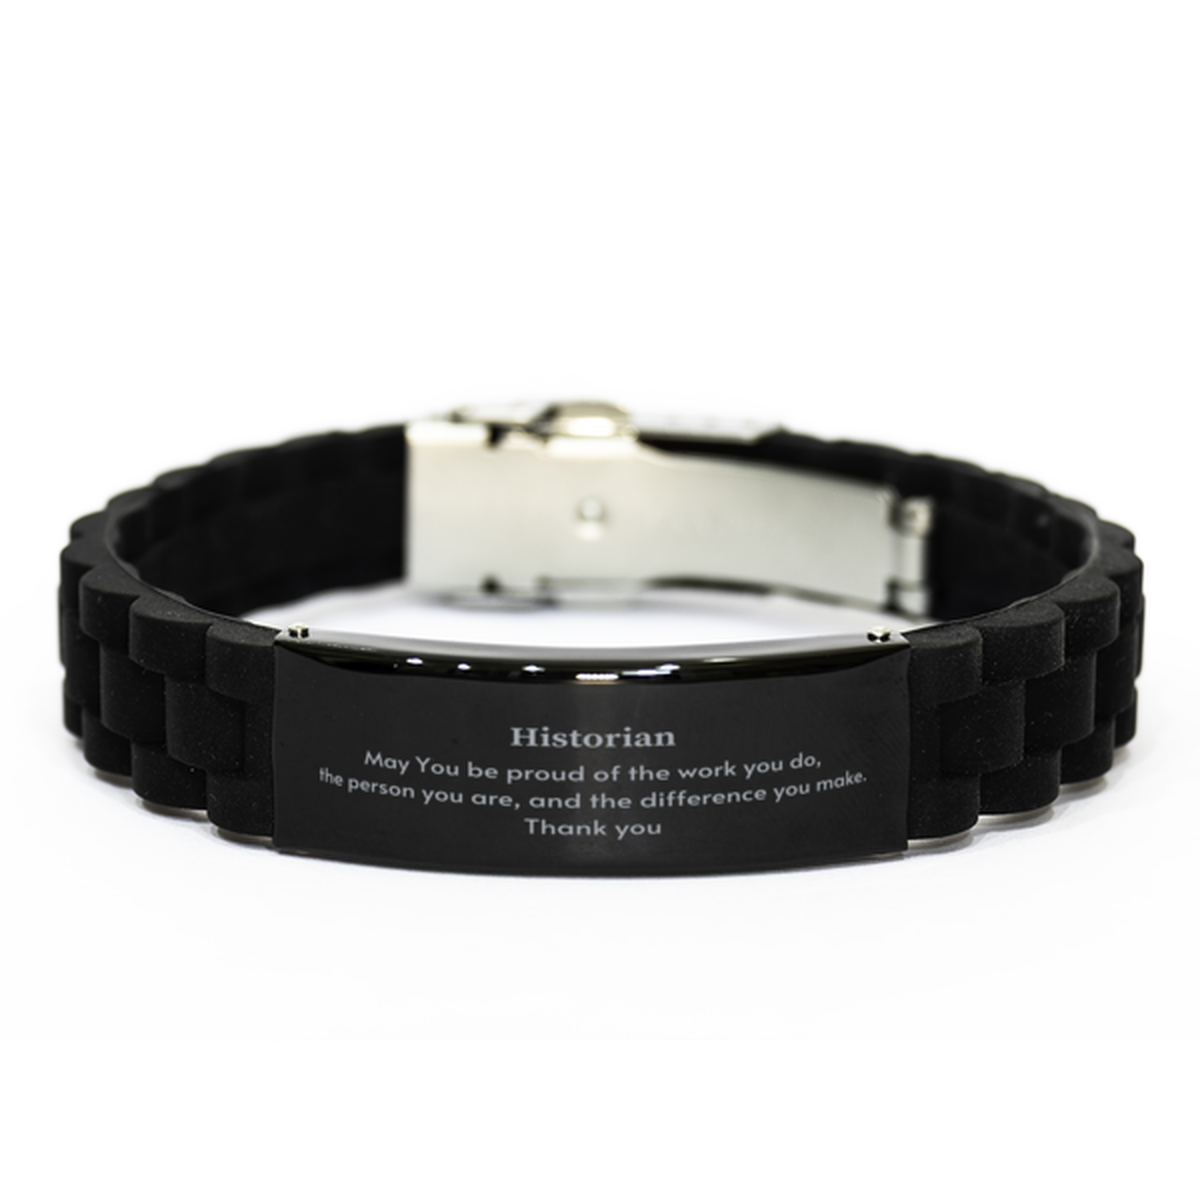 Heartwarming Black Glidelock Clasp Bracelet Retirement Coworkers Gifts for Historian, Historian May You be proud of the work you do, the person you are Gifts for Boss Men Women Friends